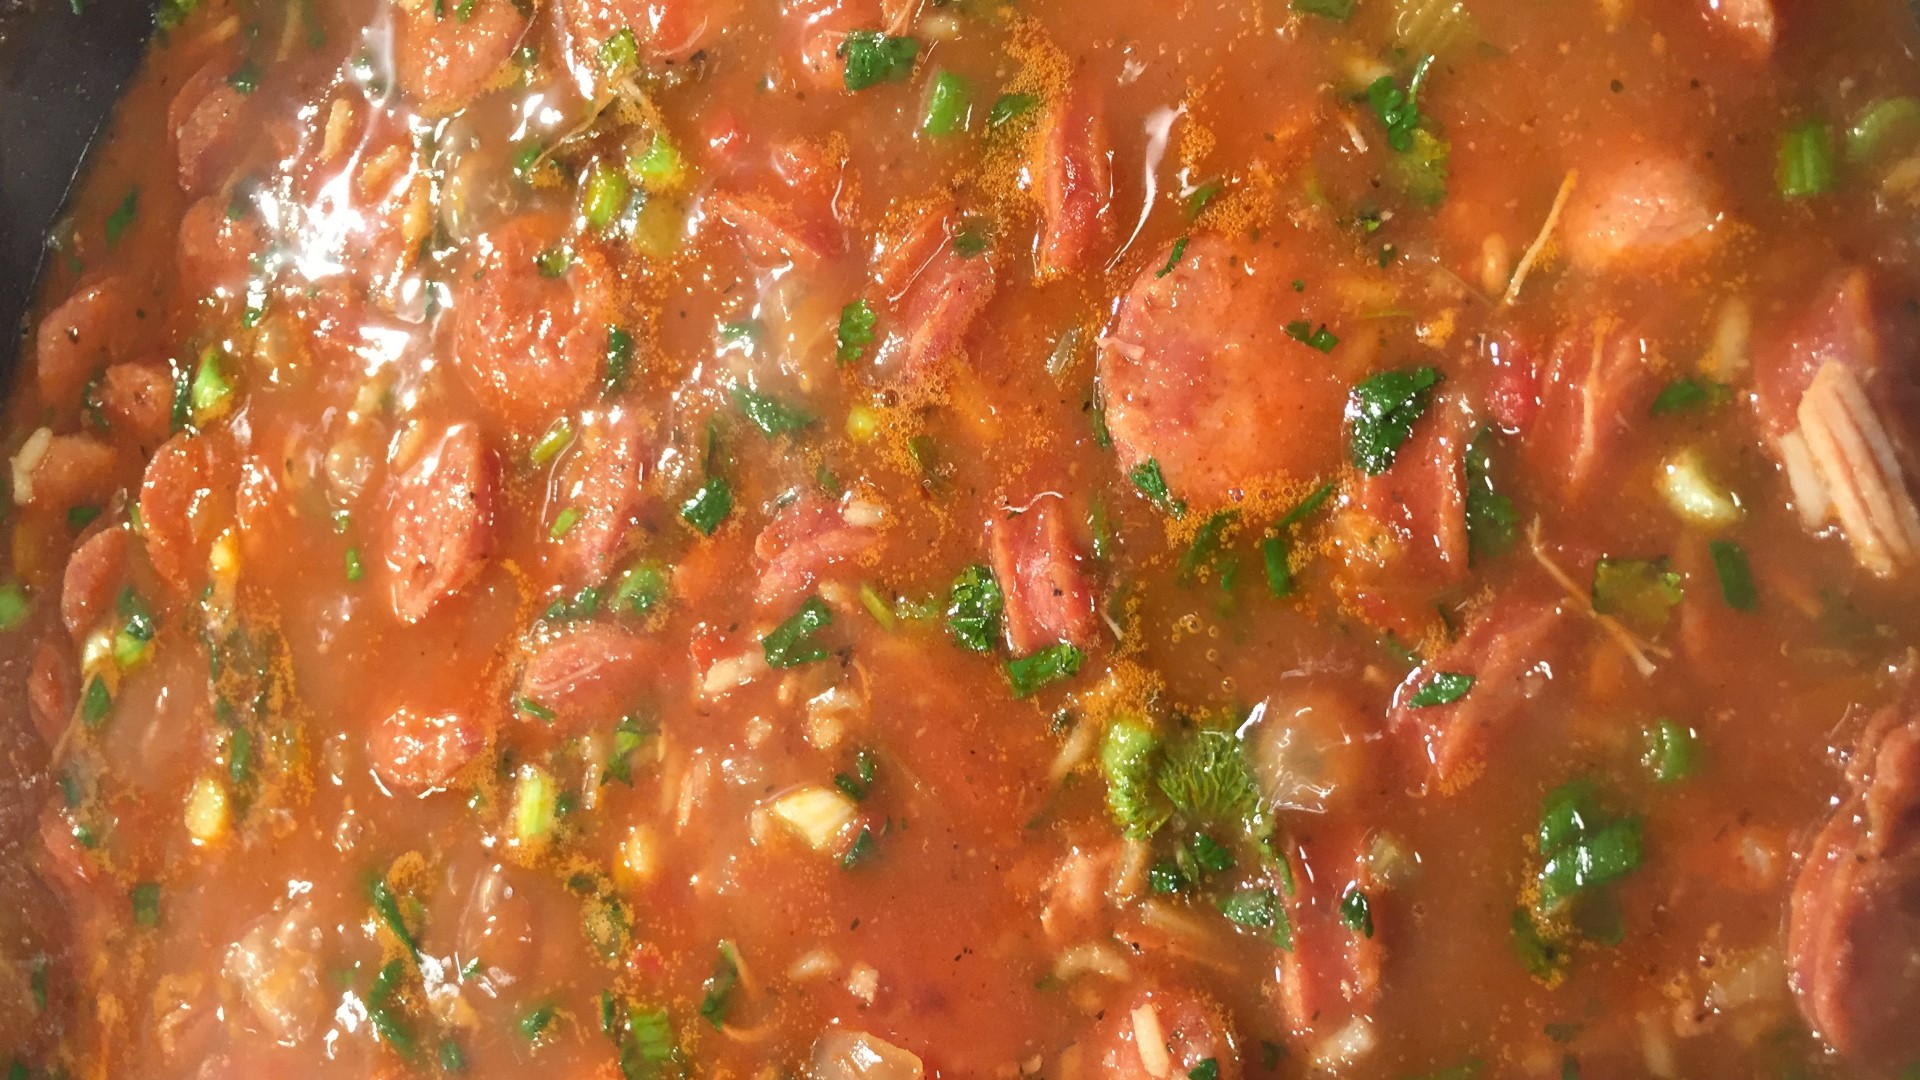 Chef Kevin Belton's delicious jambalaya soup will keep you warm even in ridiculously cold weather.